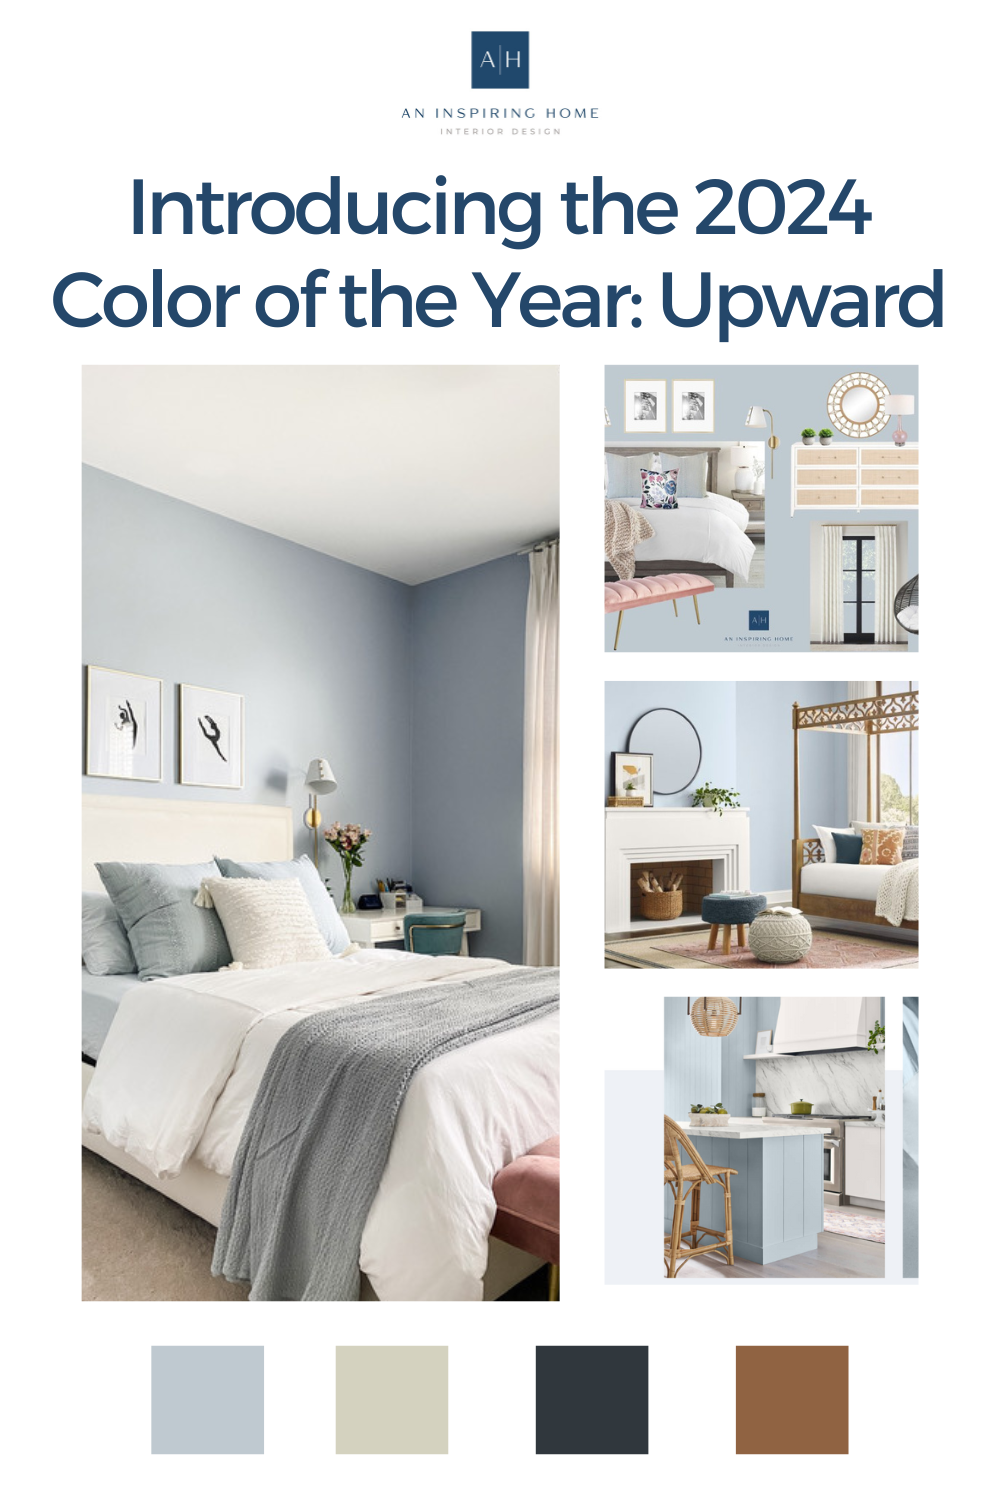 Introducing the 2024 Color of the Year: Upward